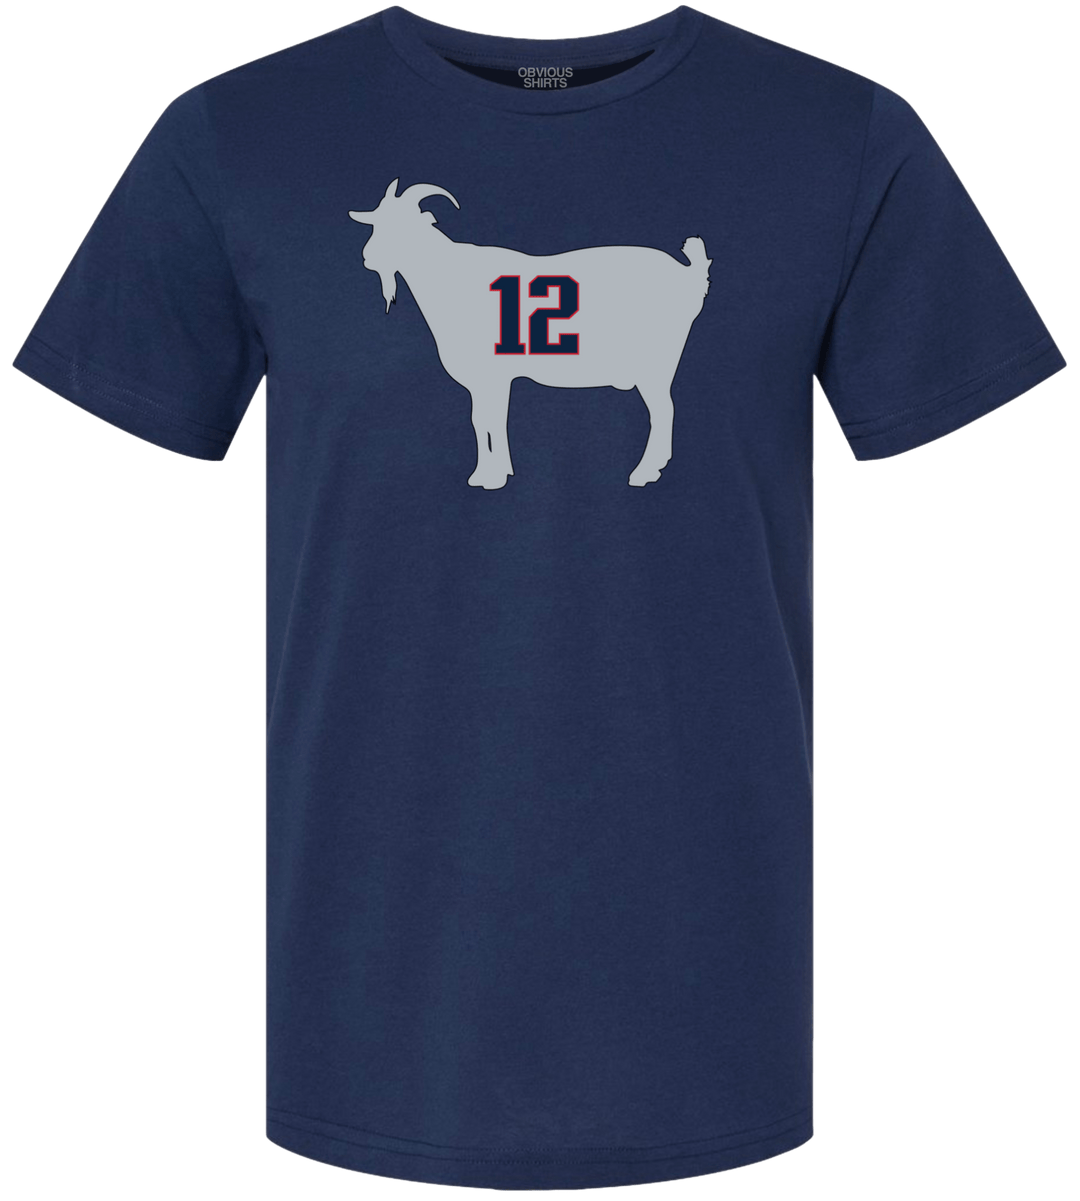 NEW ENGLAND'S GOAT 12 - OBVIOUS SHIRTS